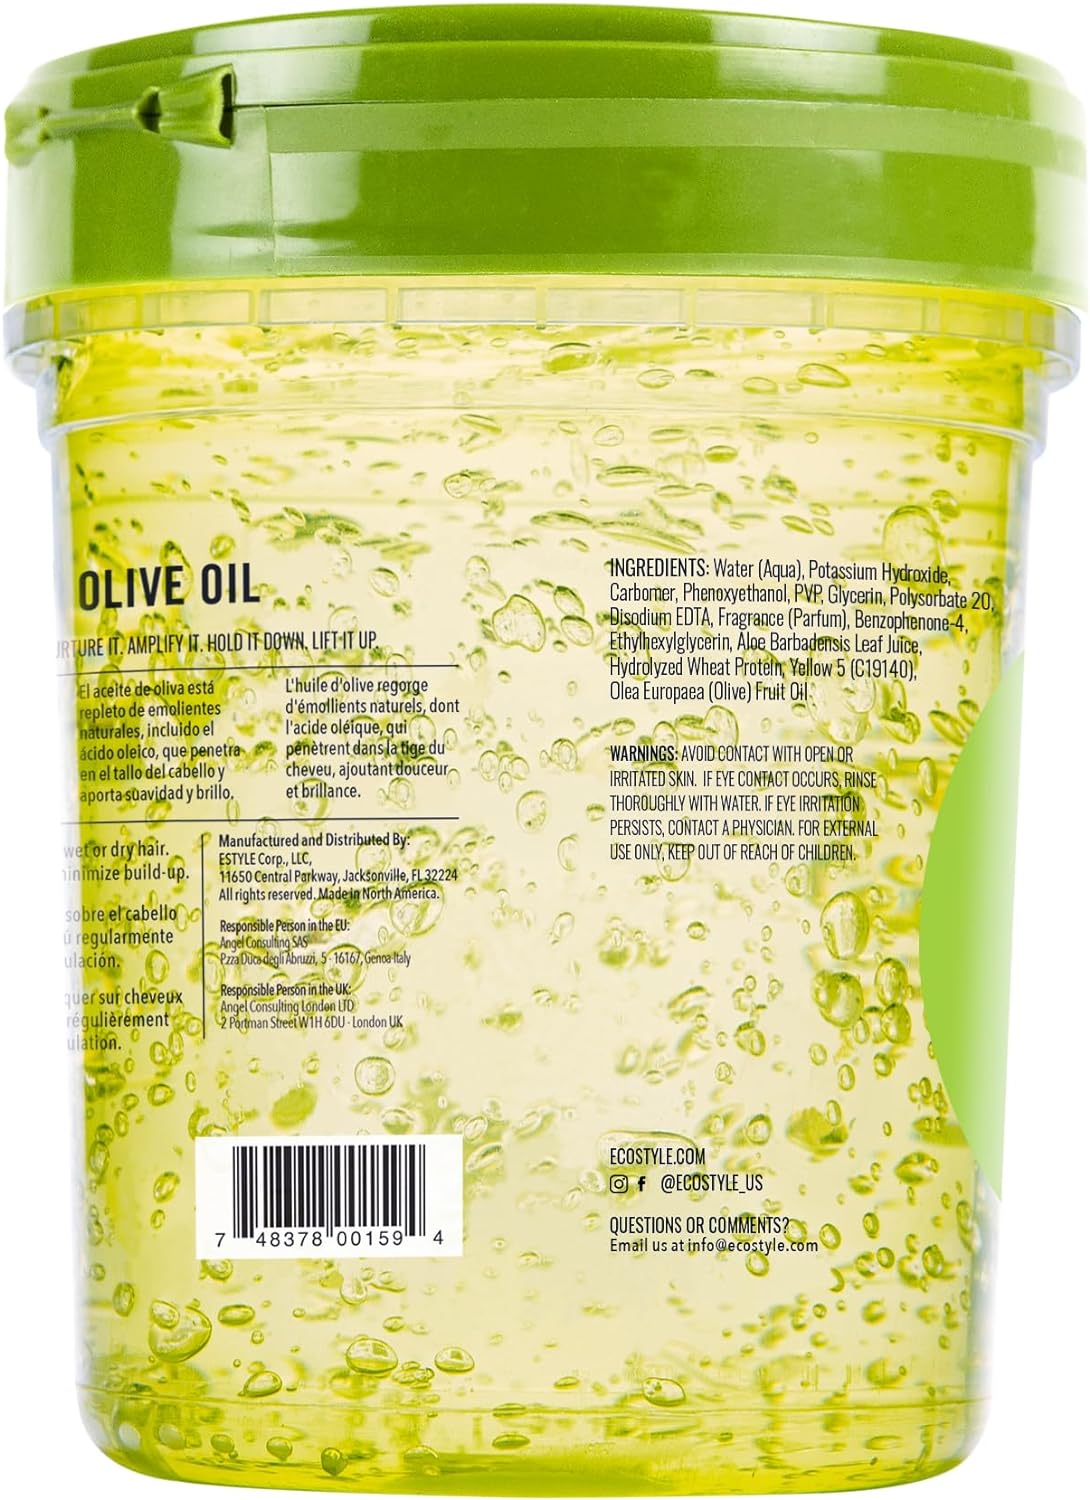 Eco Style Olive Oil Styling Gel 946ml